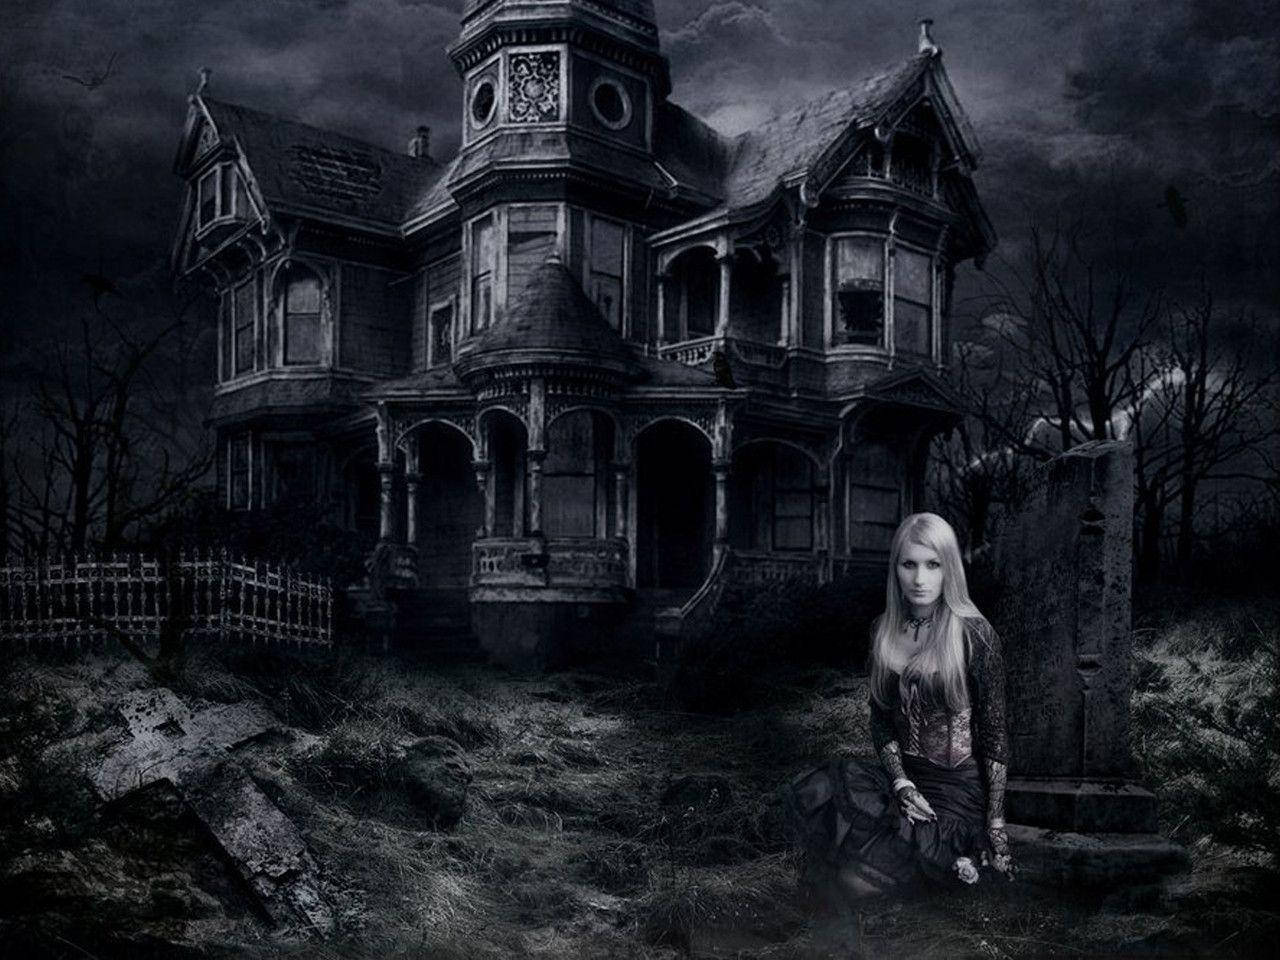 Spooky And Scary Haunted House On Halloween Night Wallpaper